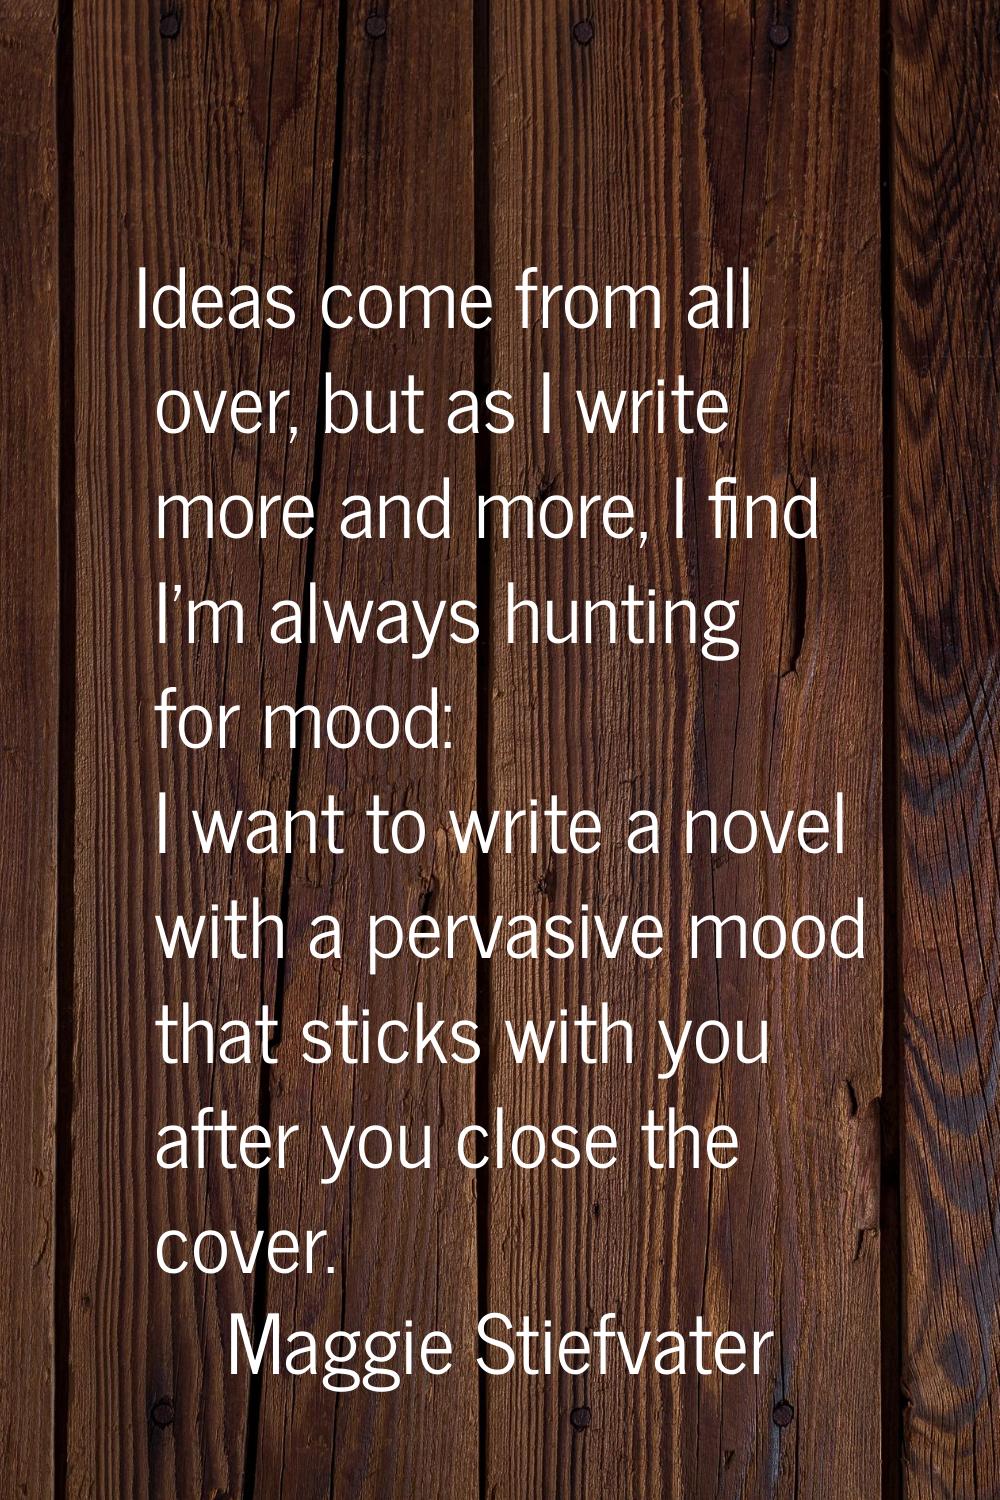 Ideas come from all over, but as I write more and more, I find I'm always hunting for mood: I want 